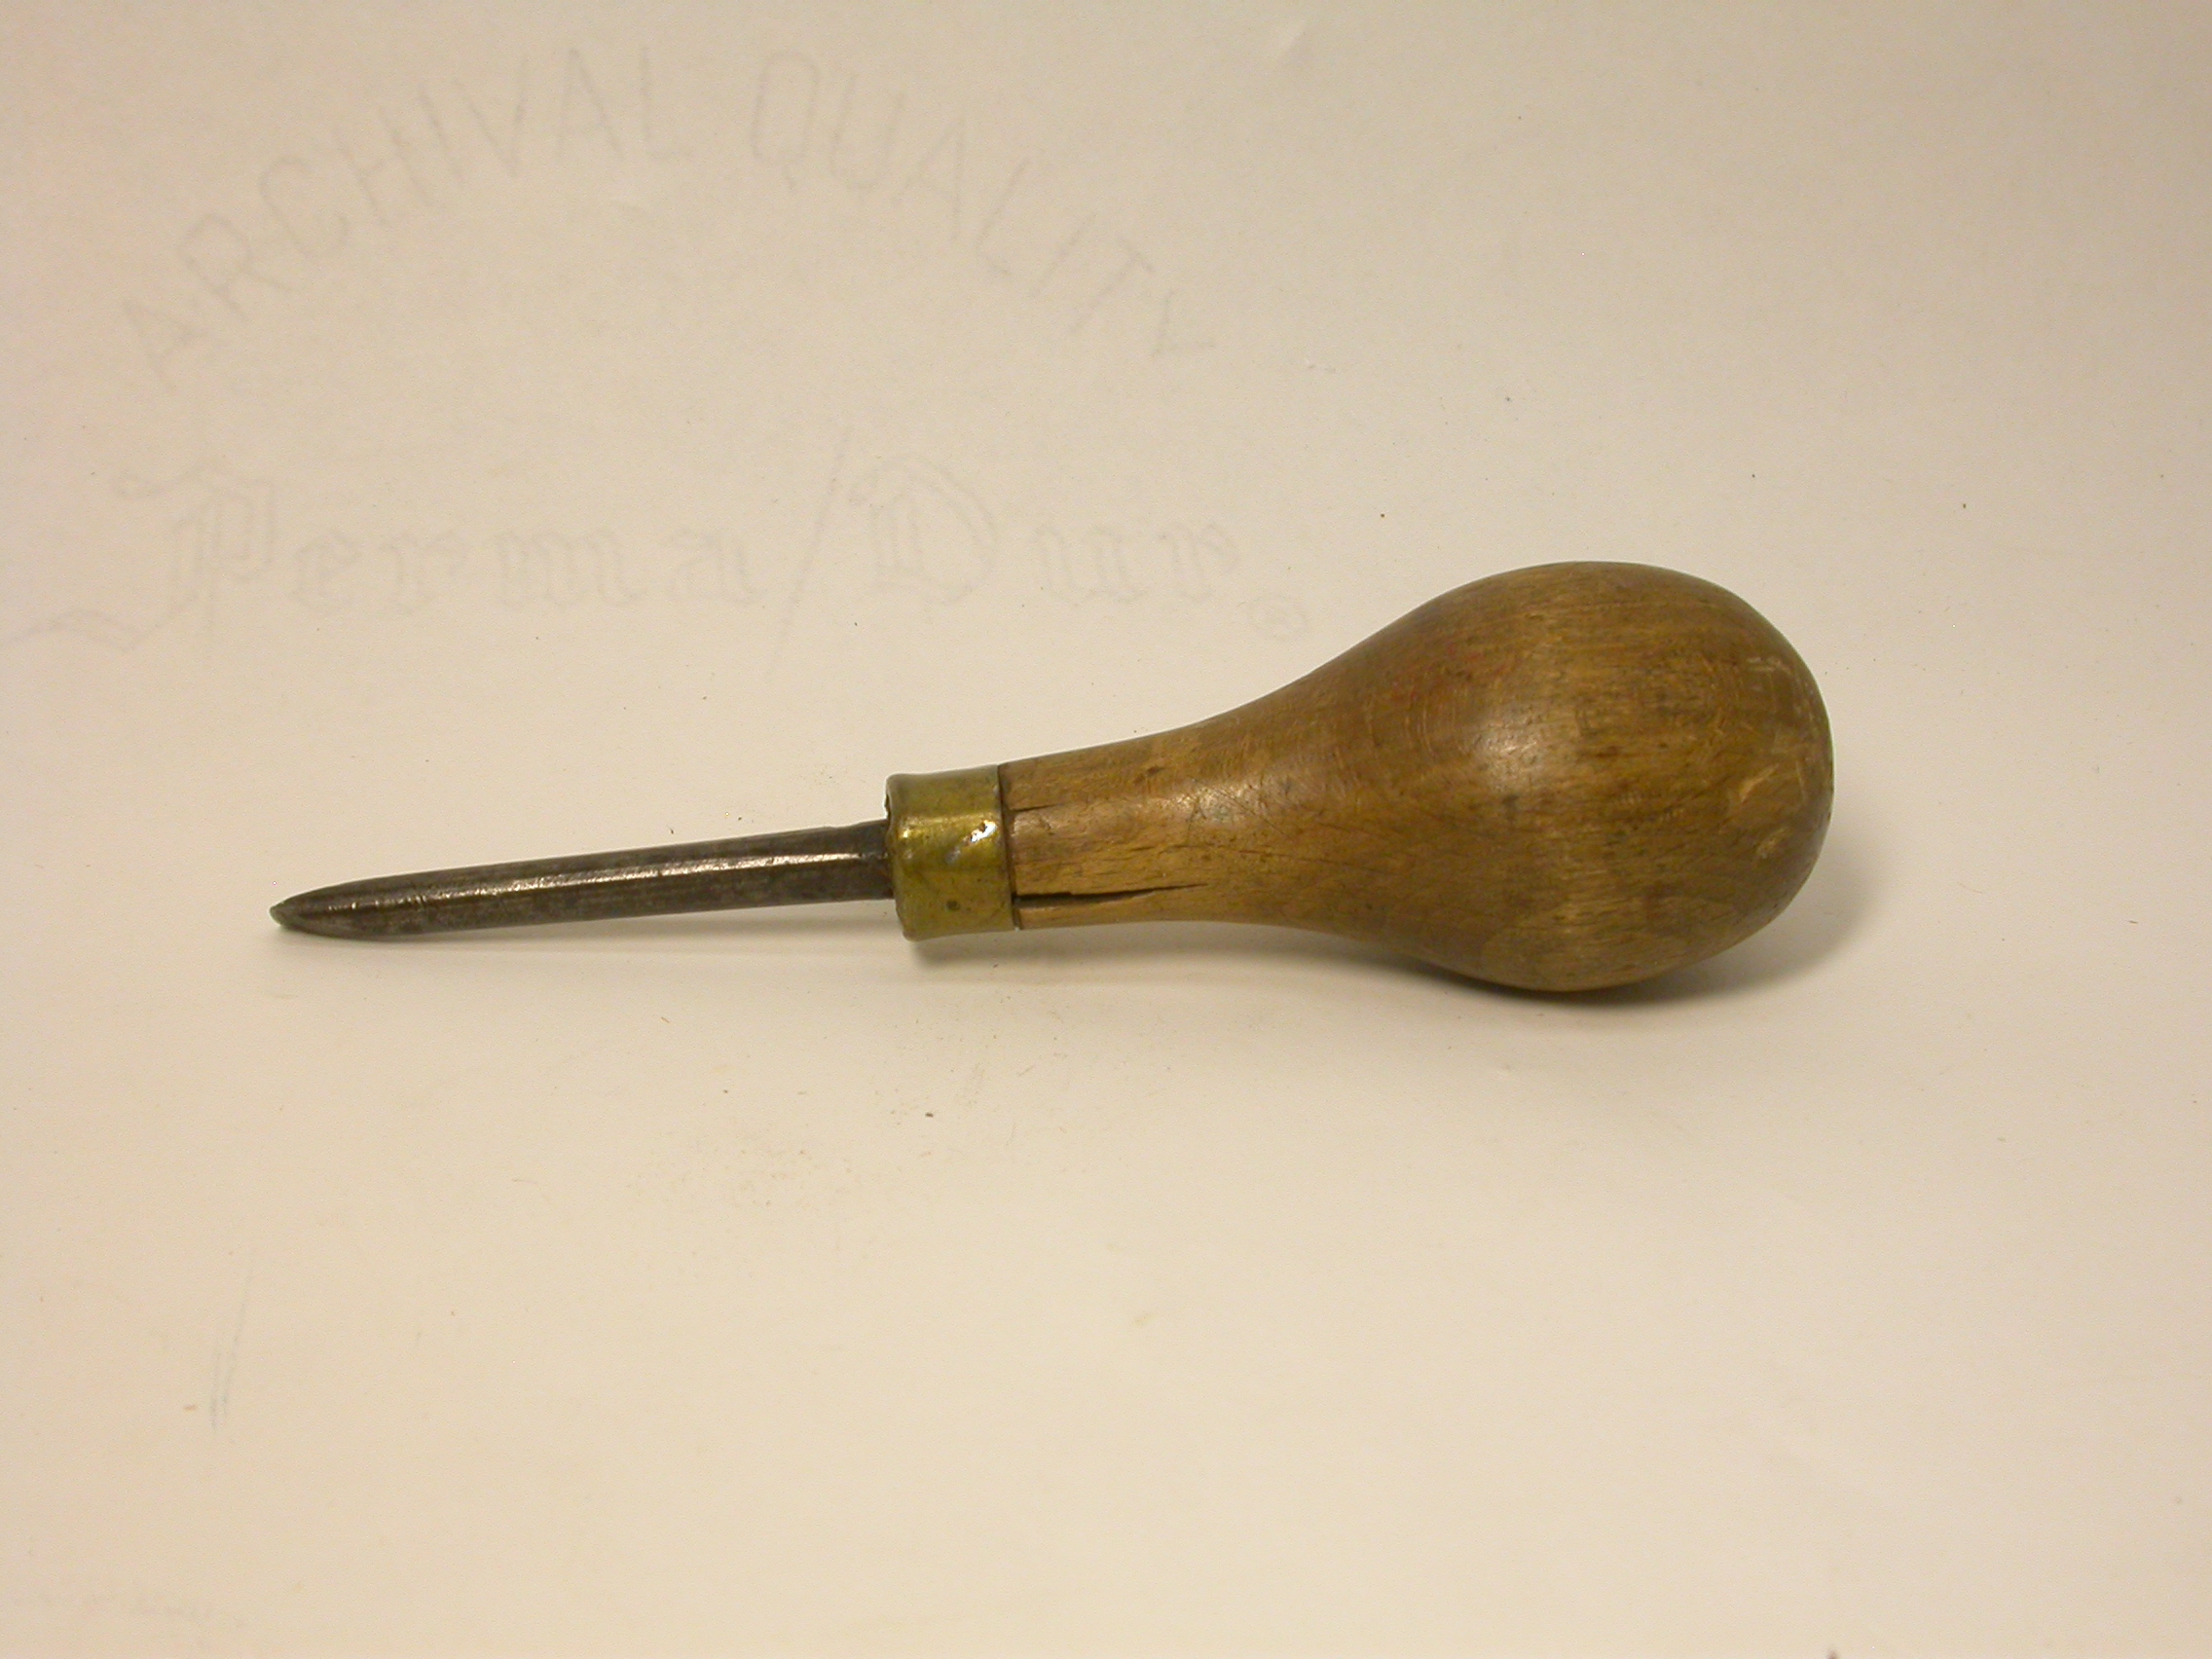 a%20brad%20awl%20with%20a%20knobbed%20wooden%20handle